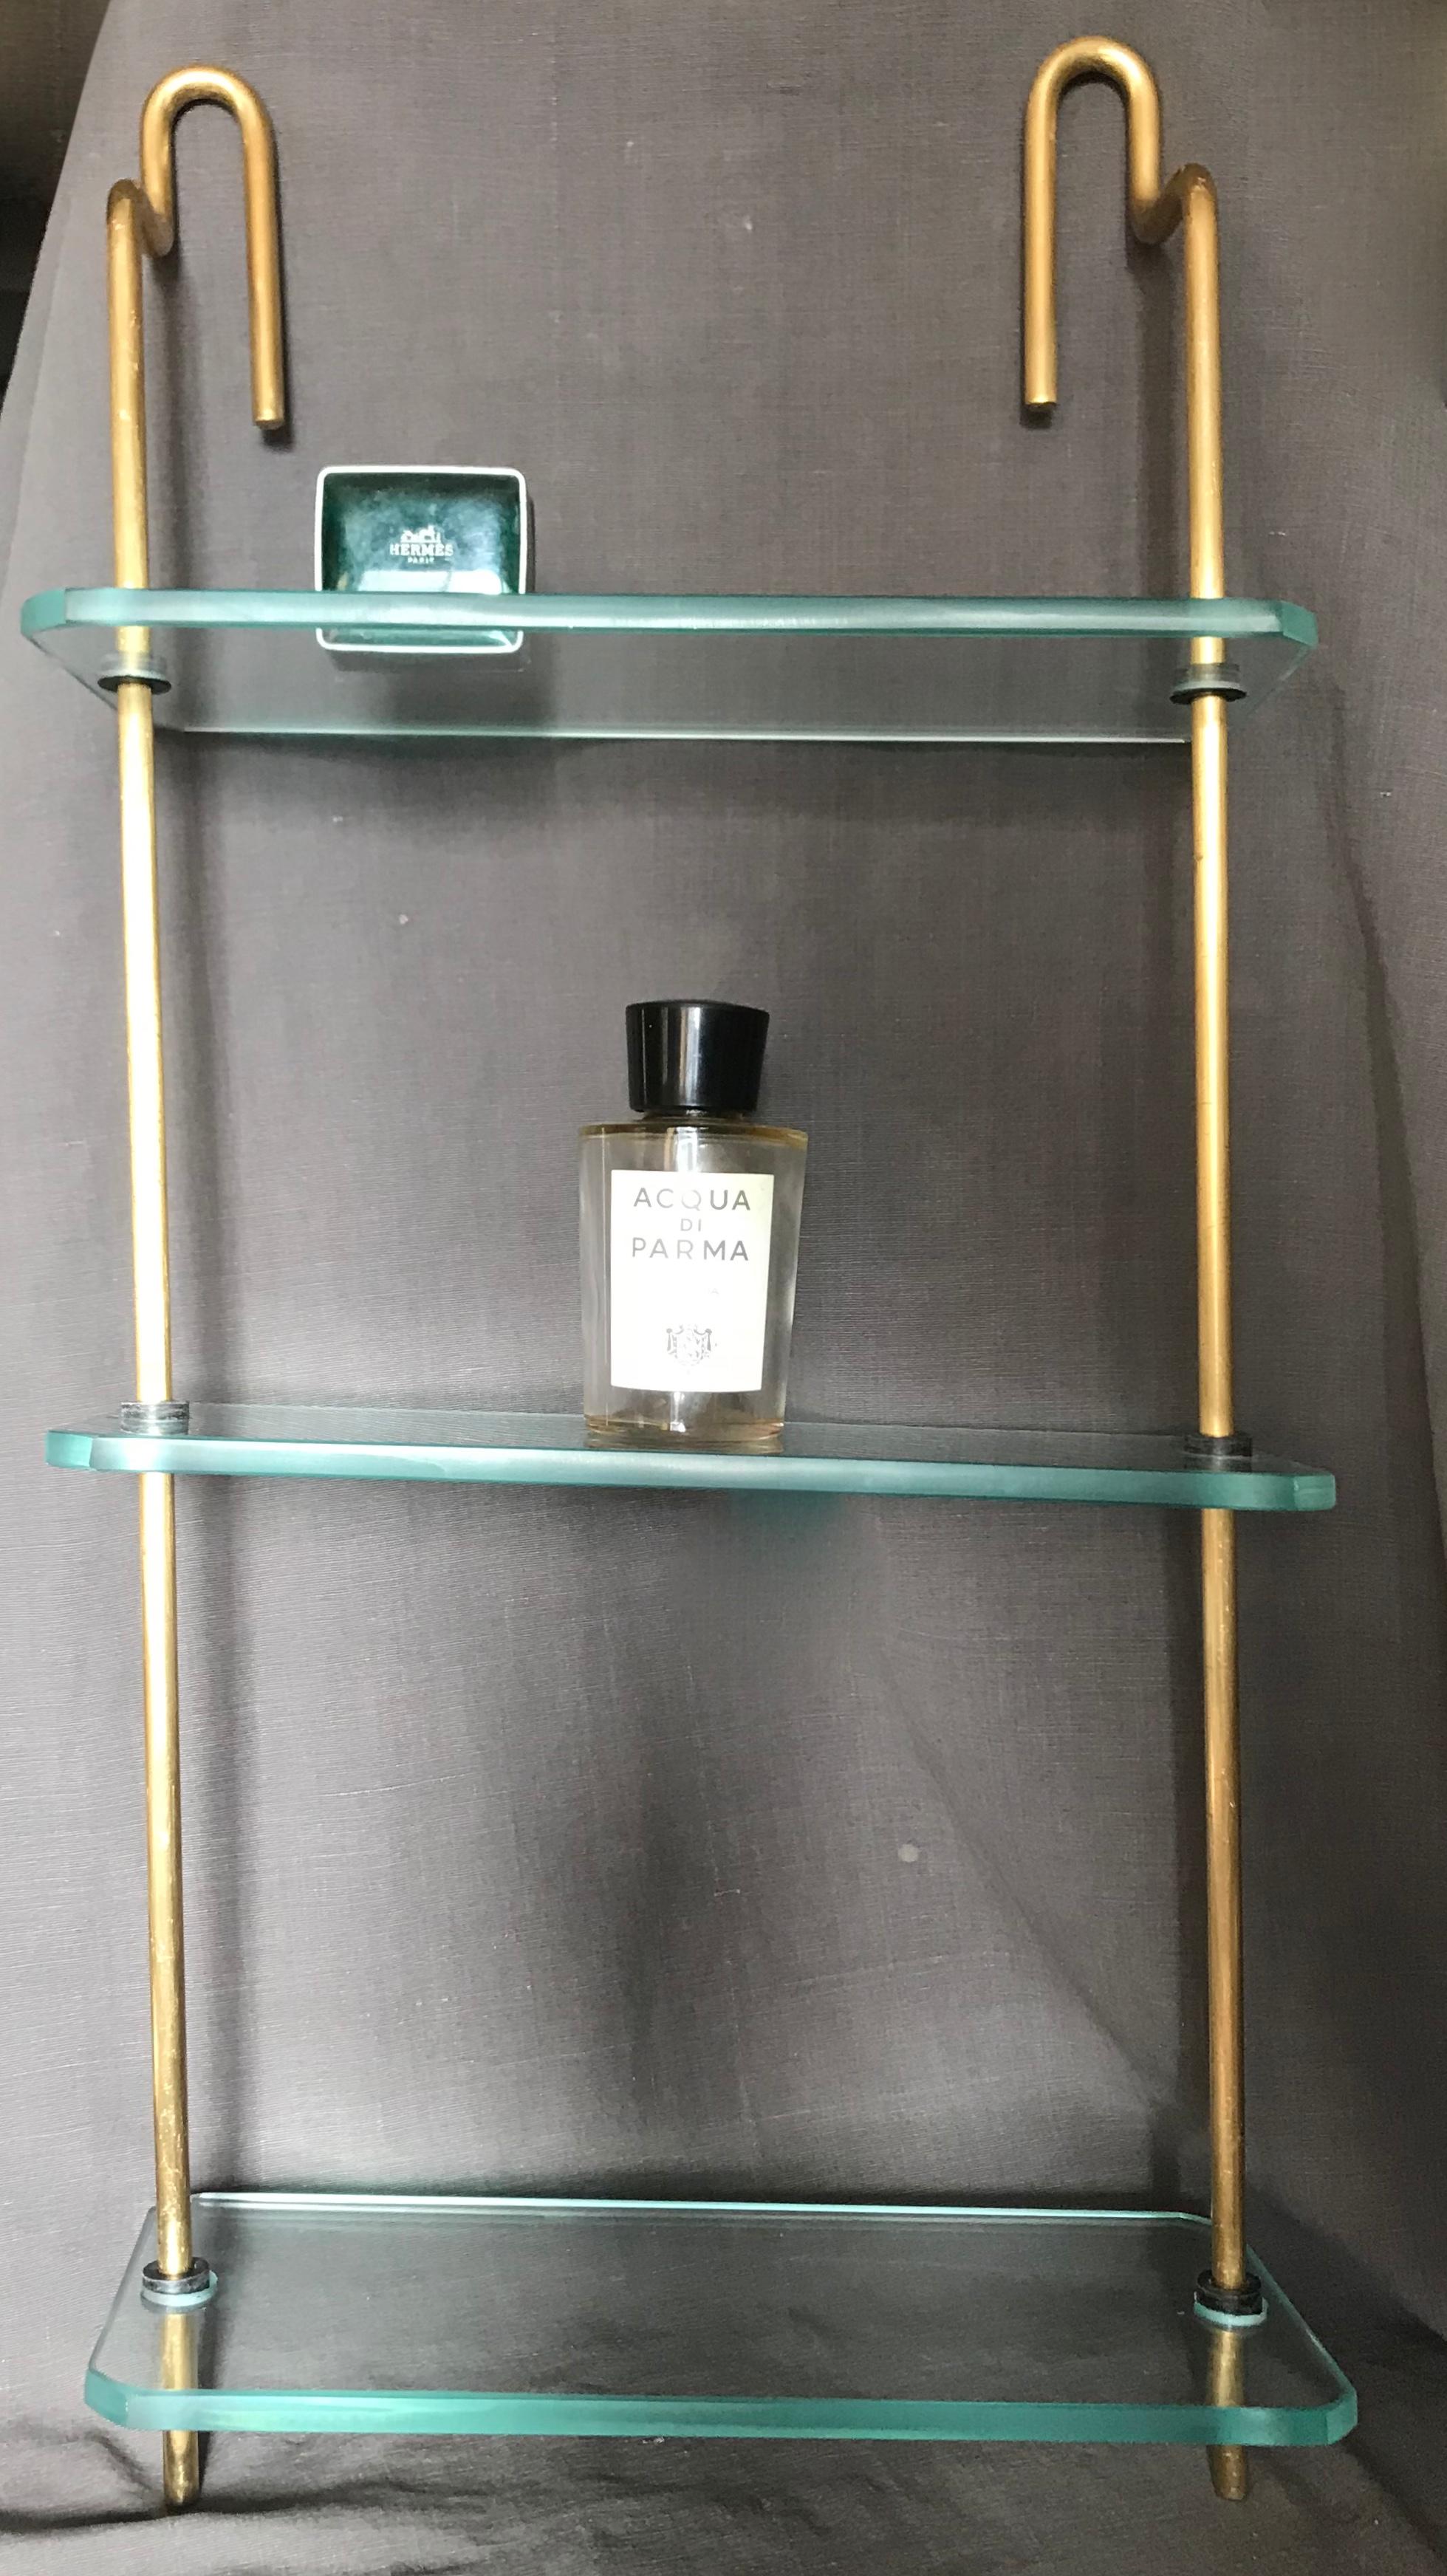 Mid-Century Modern Italian brass and glass hanging shelves. Vintage brass and thick glass shelves perfect for cologne/perfume display etc in bath or dressing room, Italy, 1960s
Italian midcentury brass and glass shelves. Brass and three-tier